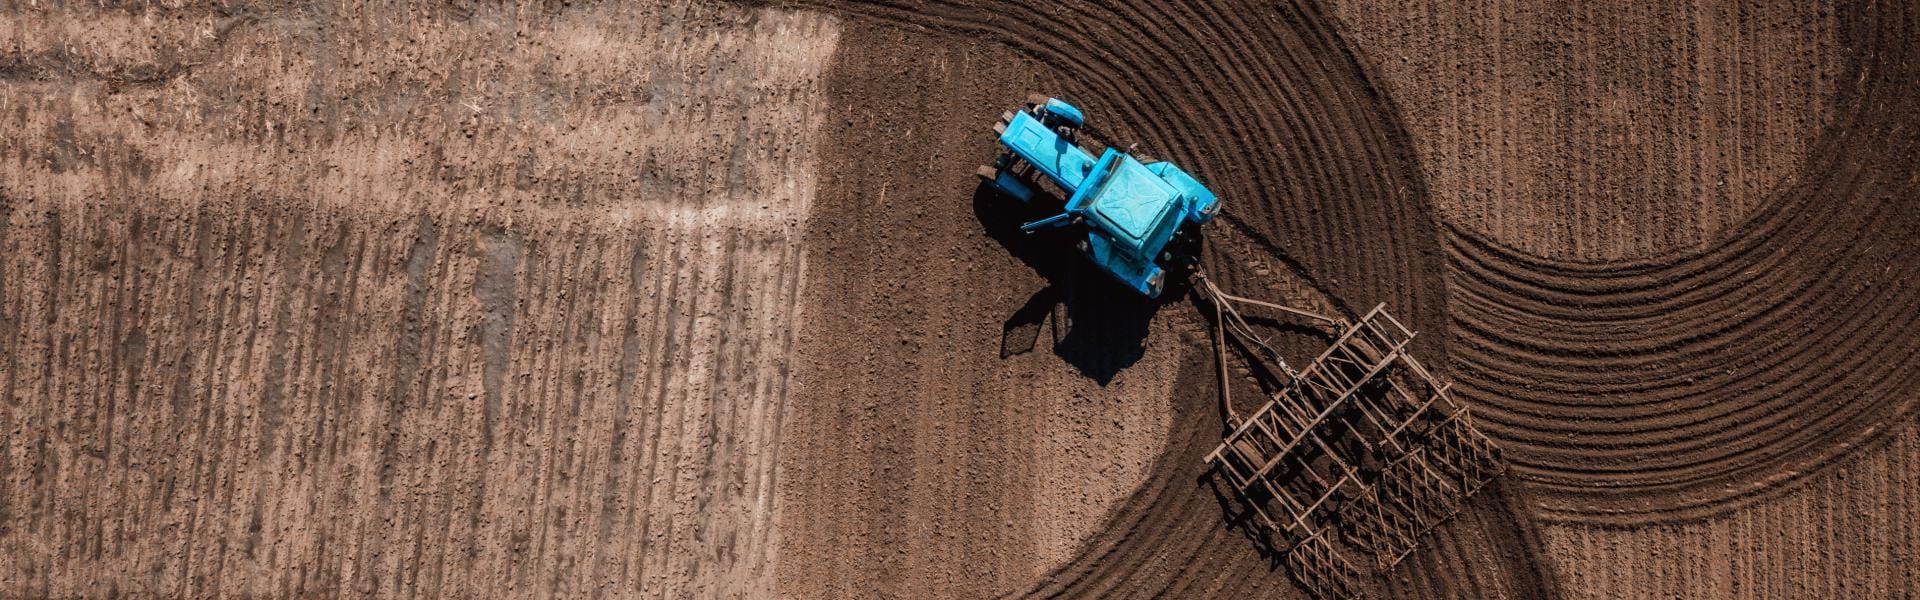 Aerial view of combine cultivating field